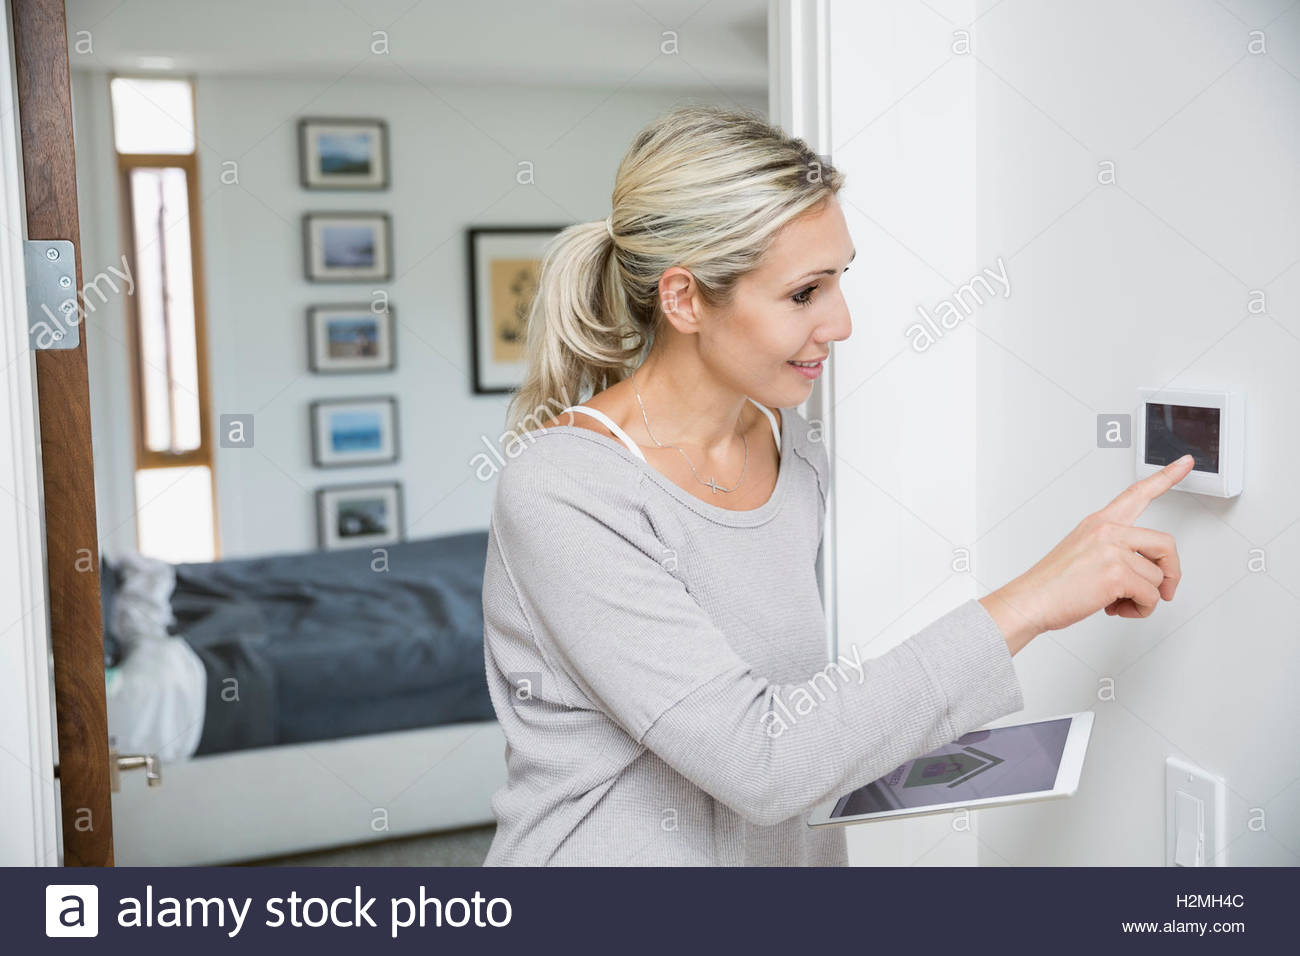 Woman programming alarm and home security app on digital tablet Stock Photo